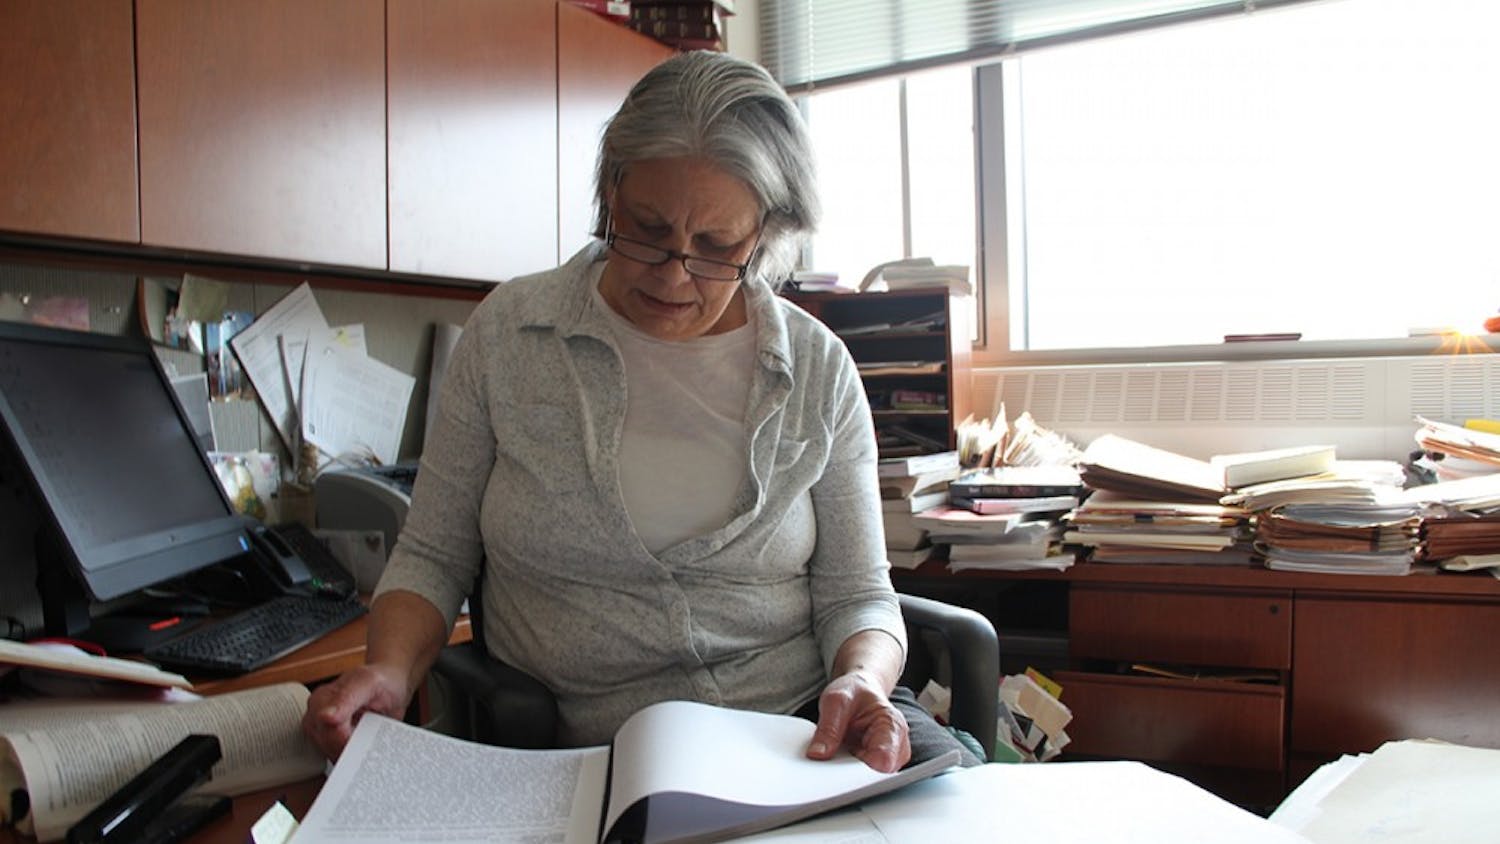 Fran Watson, an IU law professor, looks over the original police report on the "bump, rape and rob." The victim told police she was assaulted by young, black men. Darryl Pinkins was 38 at the time.